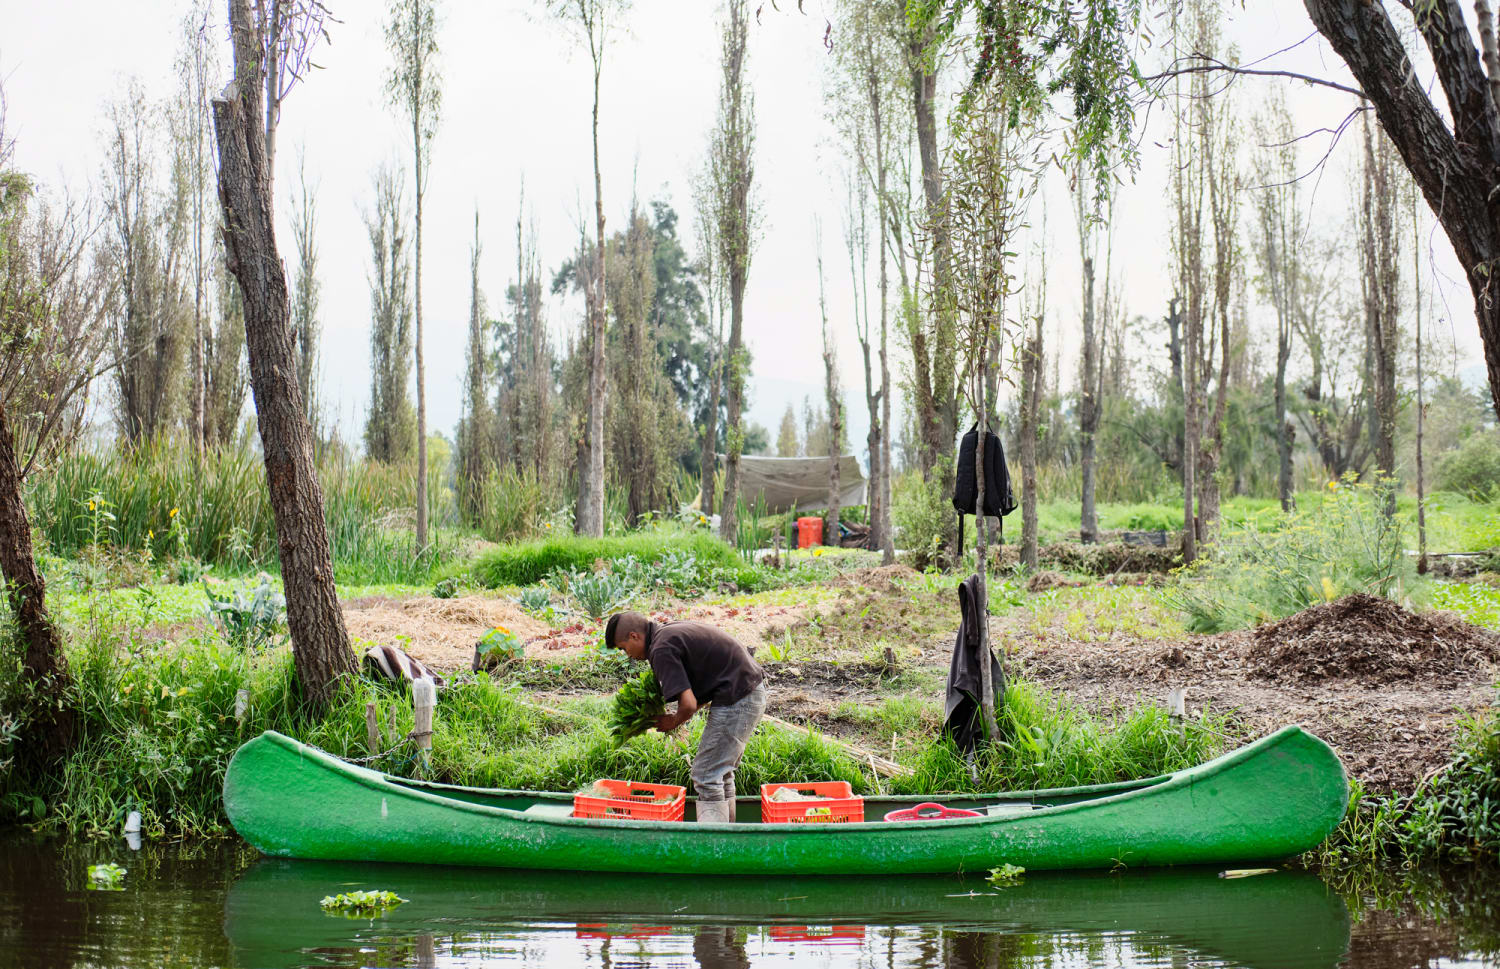 PHOTO ESSAY: The Last Floating Farms of Mexico City